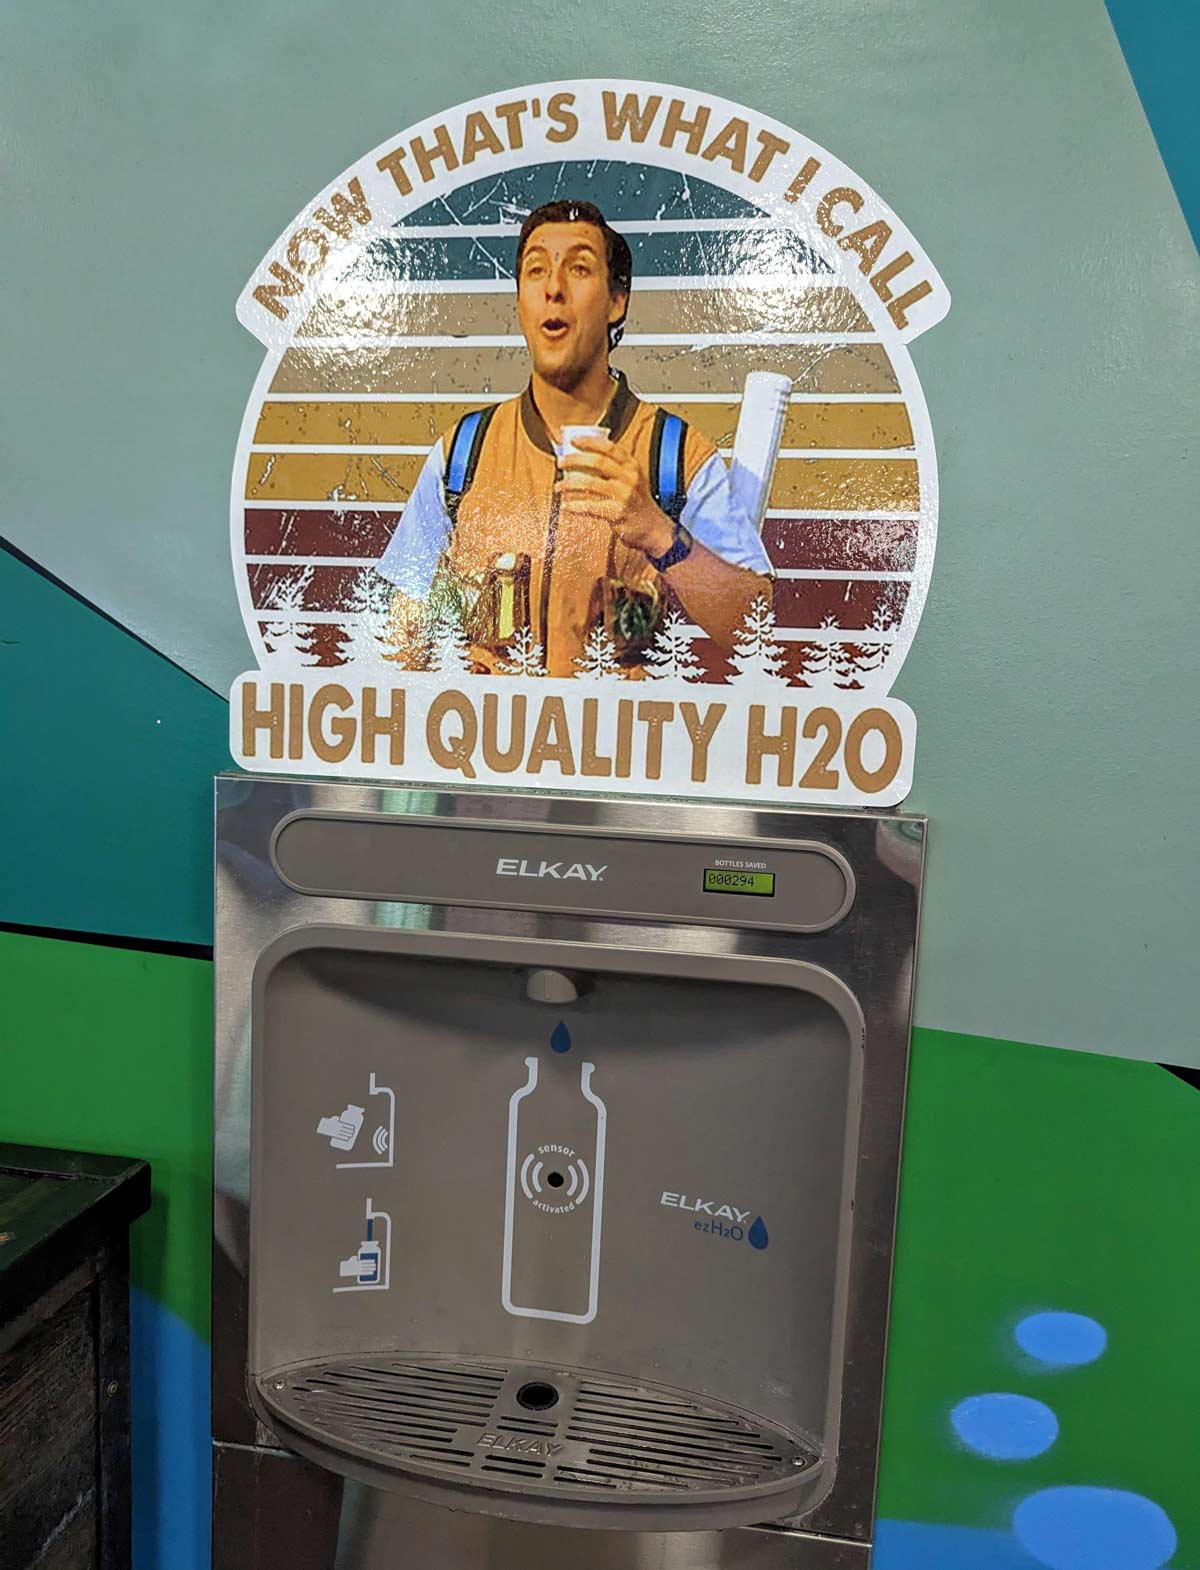 I always quoted Waterboy when drinking from water fountains, and then I found this gem